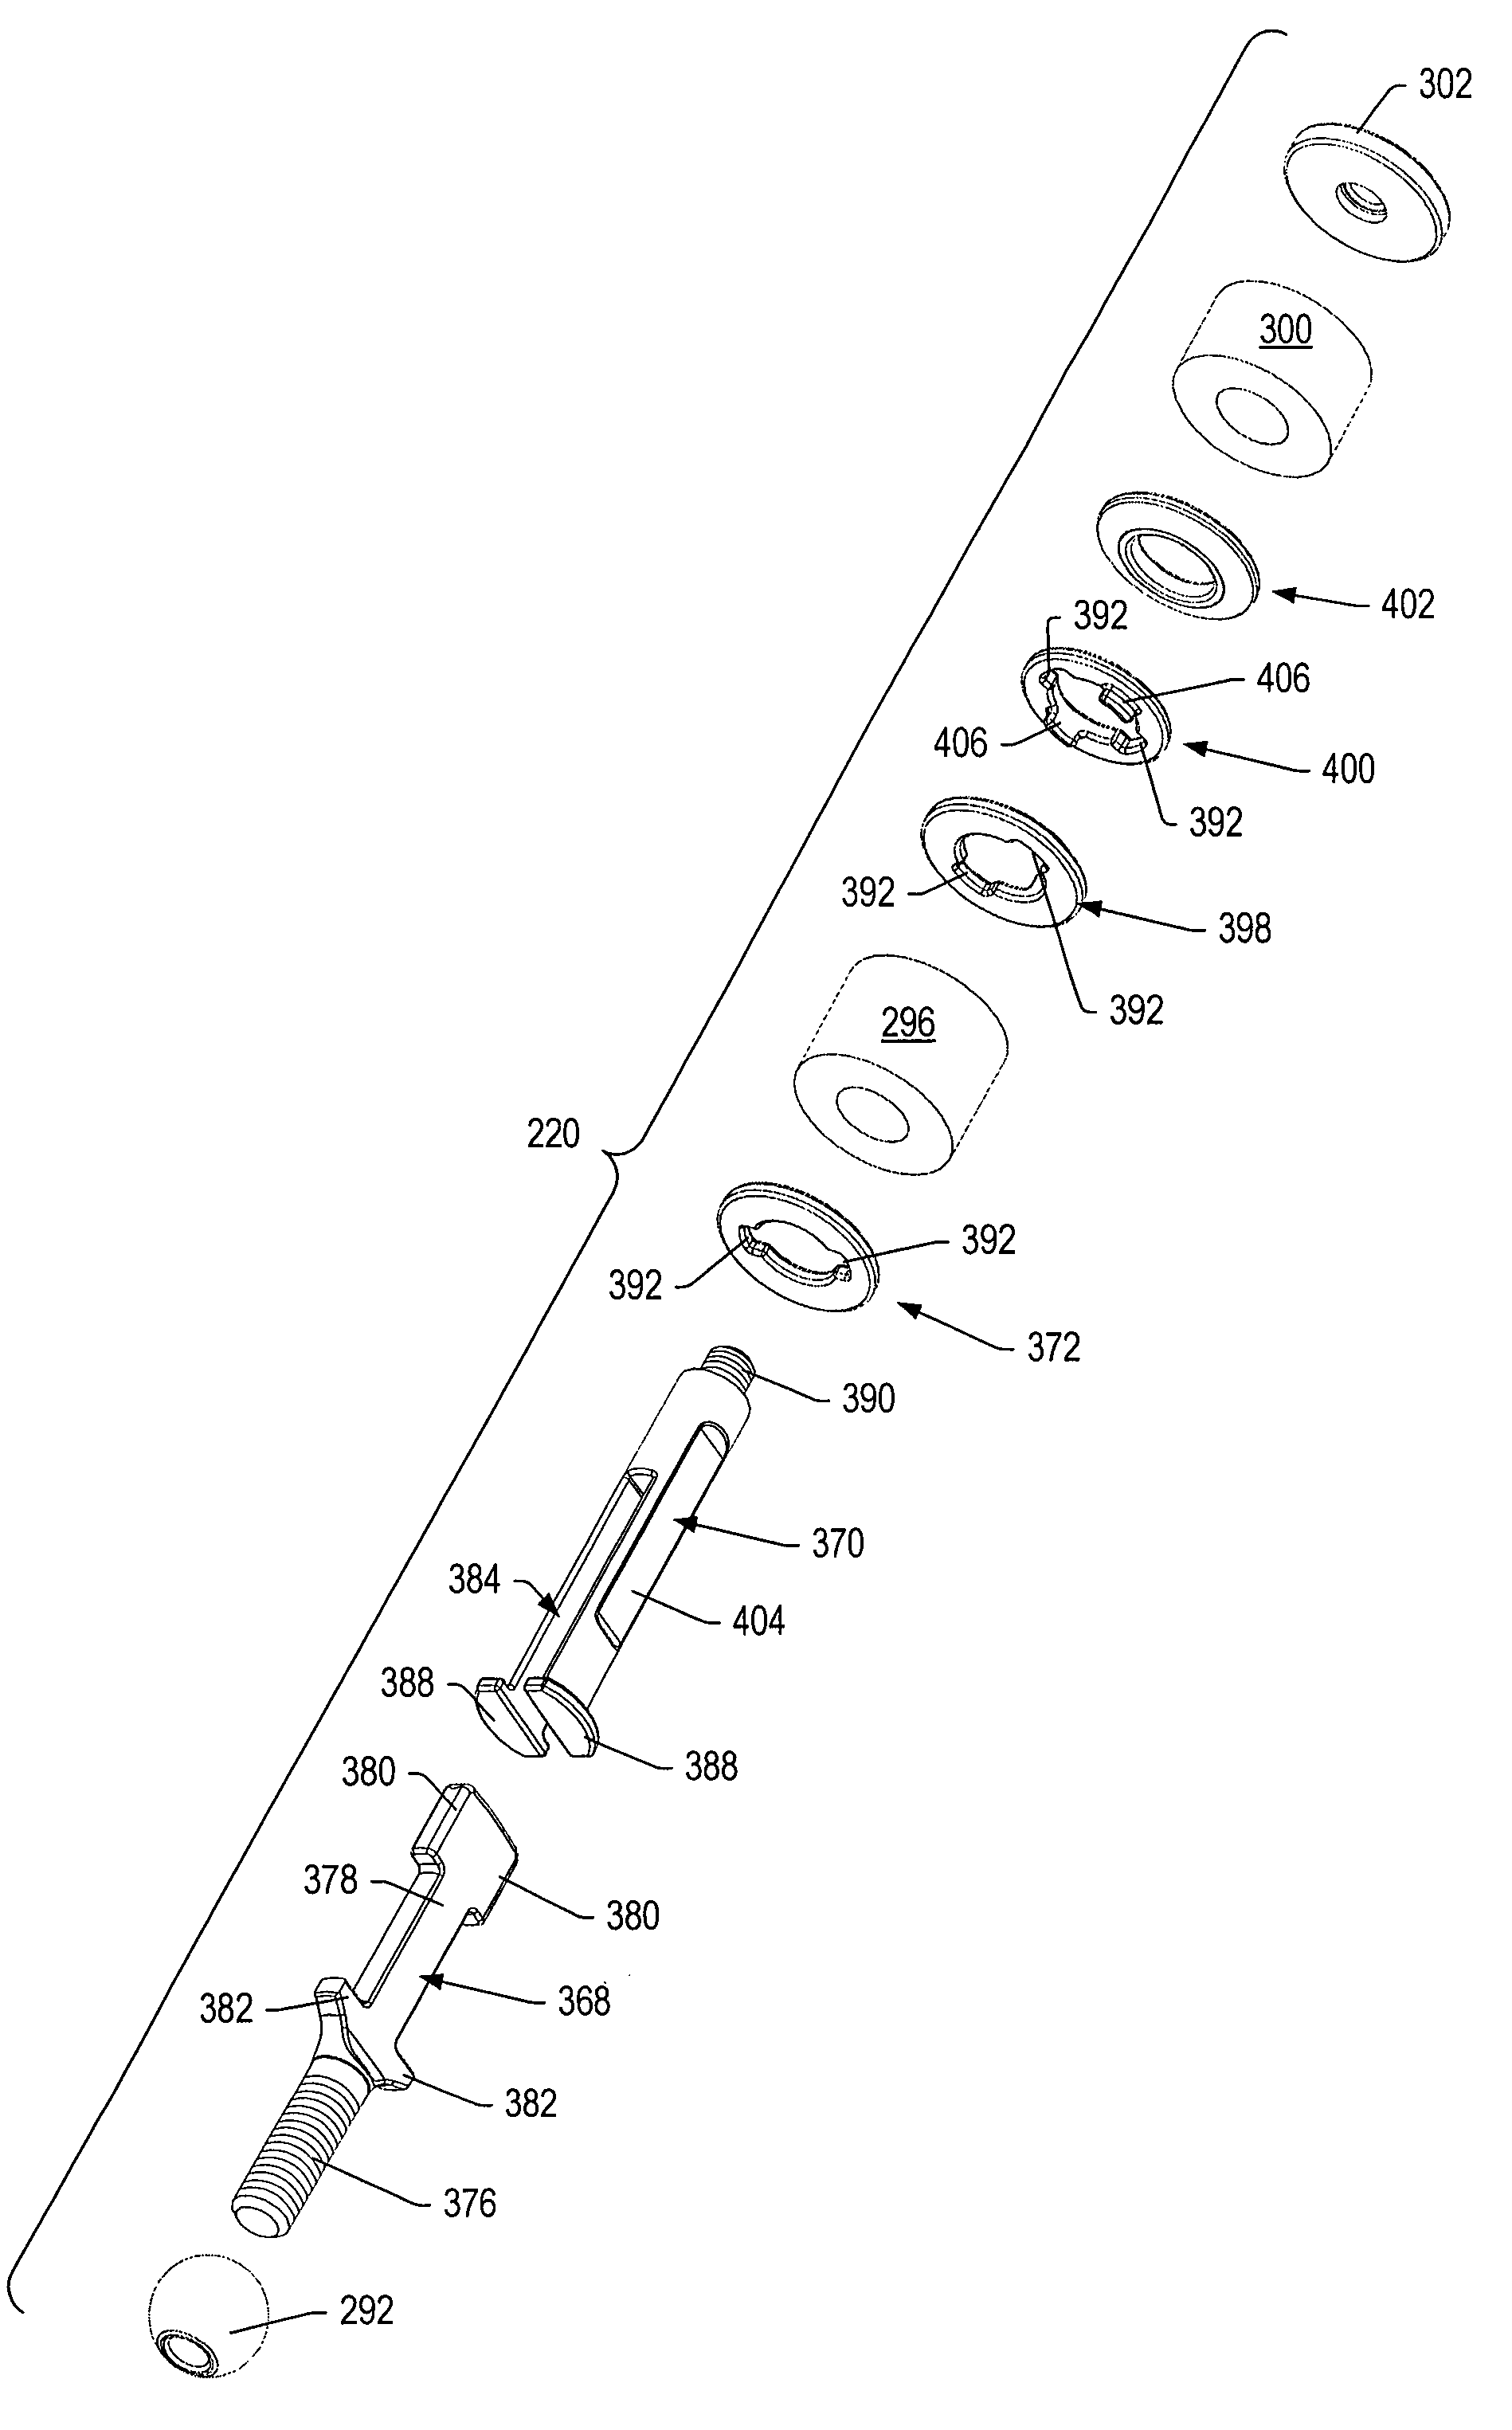 Dampener system for a posterior stabilization system with a fixed length elongated member